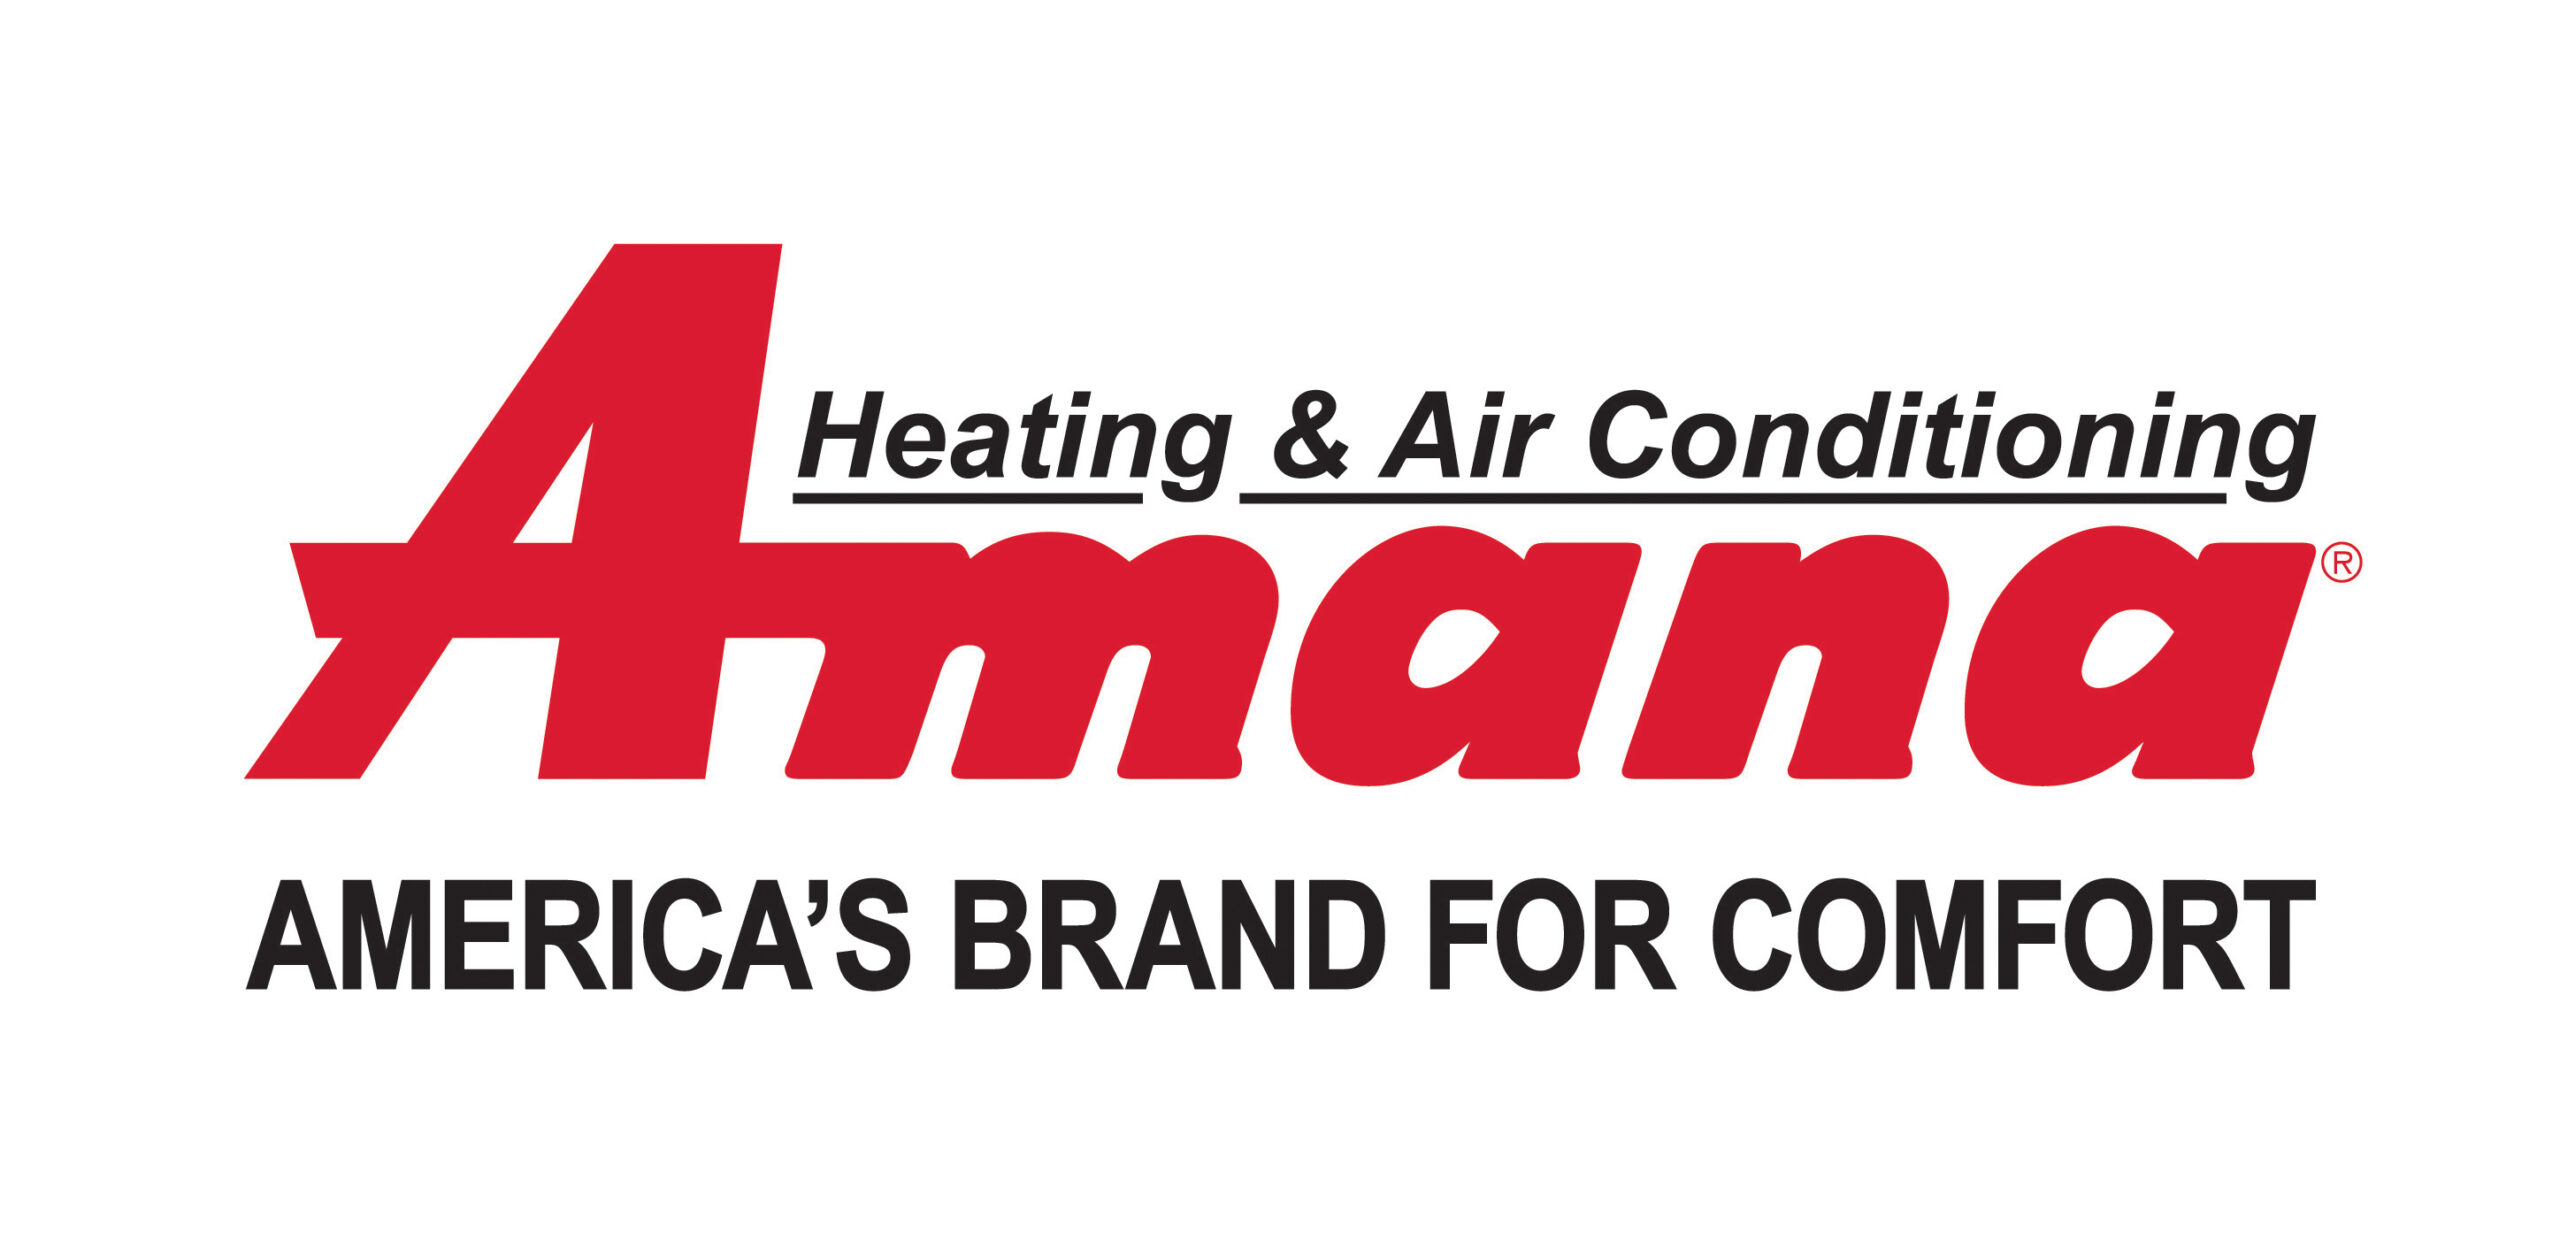 Amana Receives 2nd GOLD Award for Best Central Air Conditioning Unit 2019